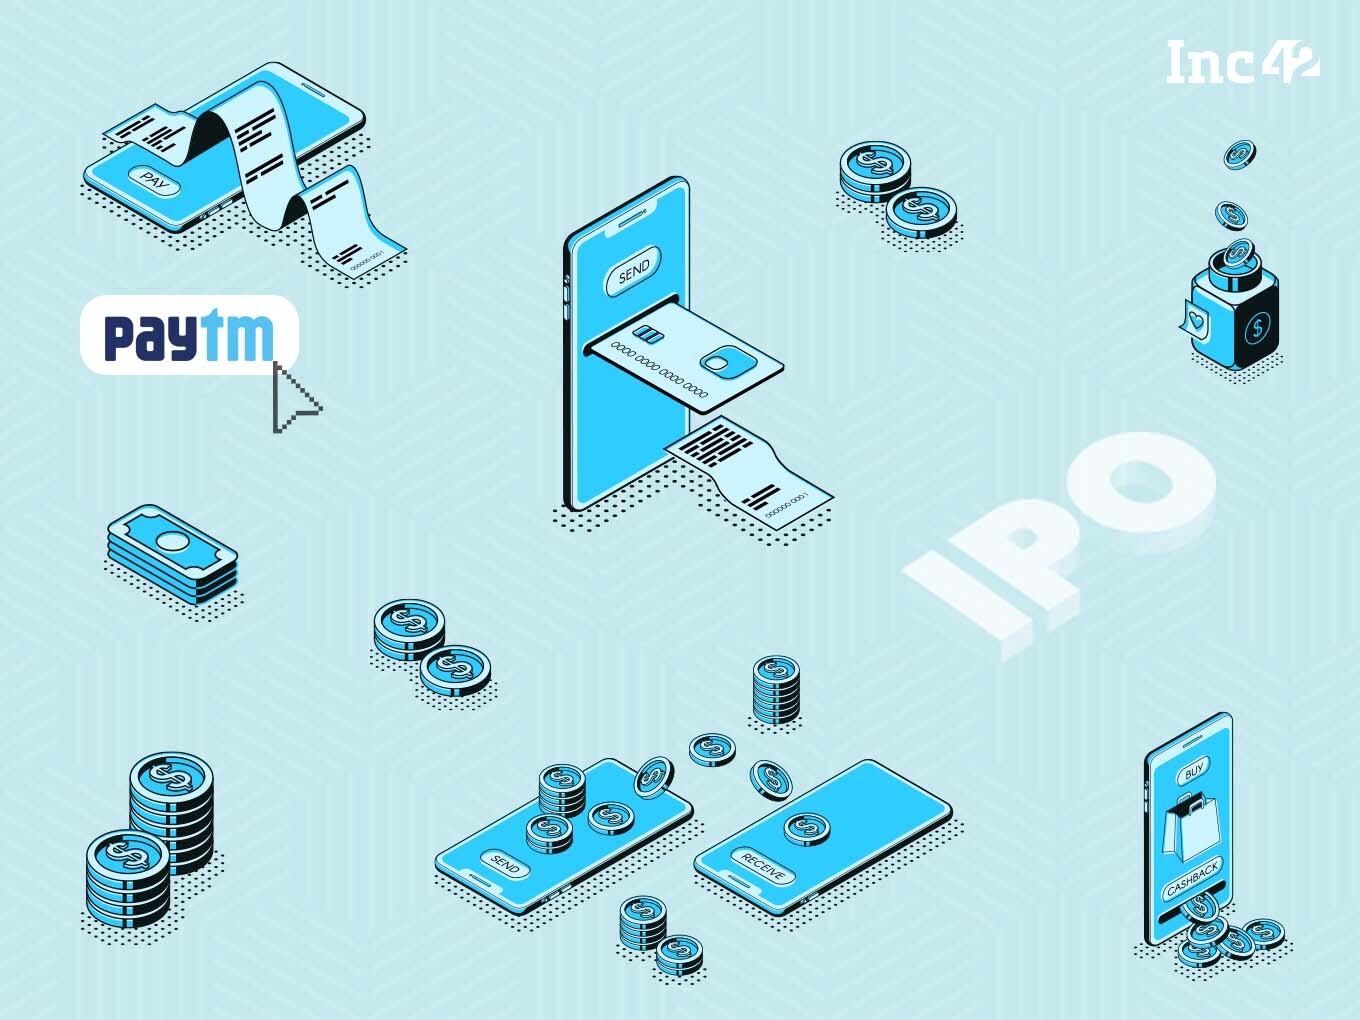 Paytm Increases IPO Size To INR 18,300 Cr, Offer Opens On November 8